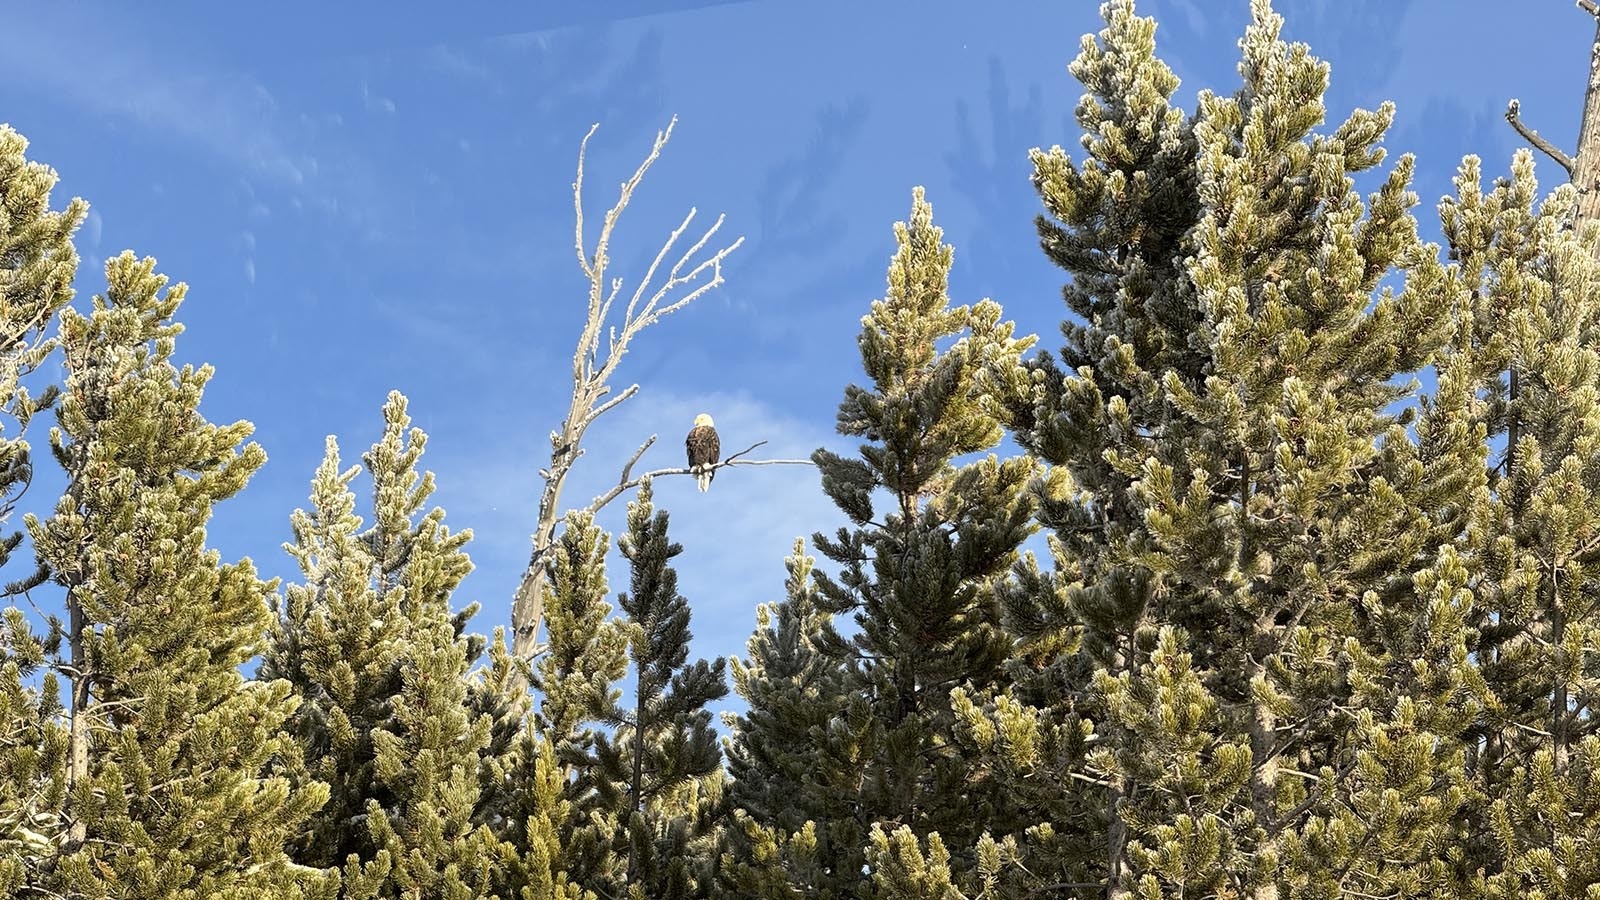 A bald eagle spotted through the window of a Yellowstone snowcoach.